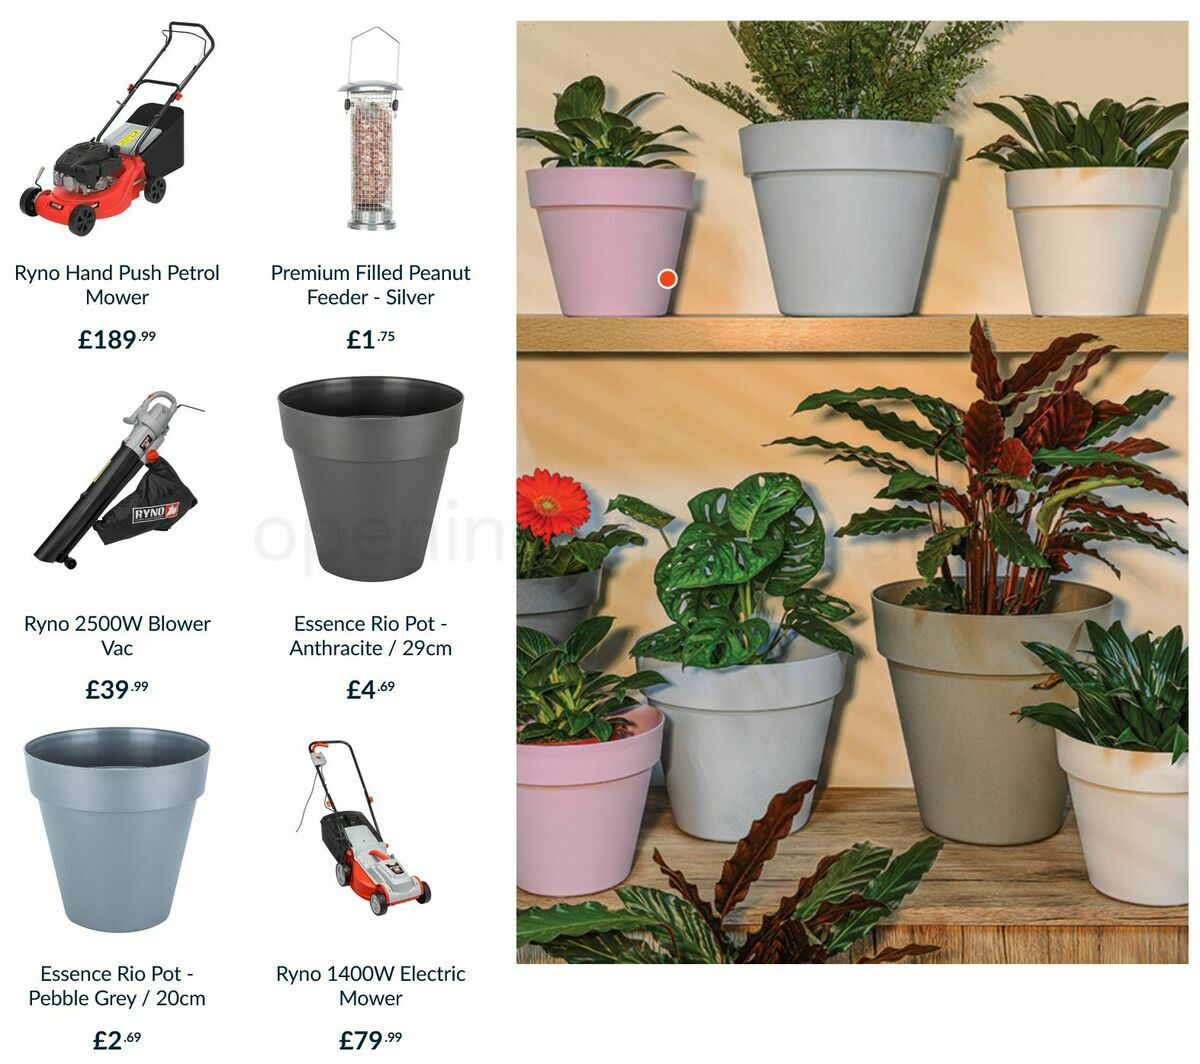 The Range Offers from 23 June